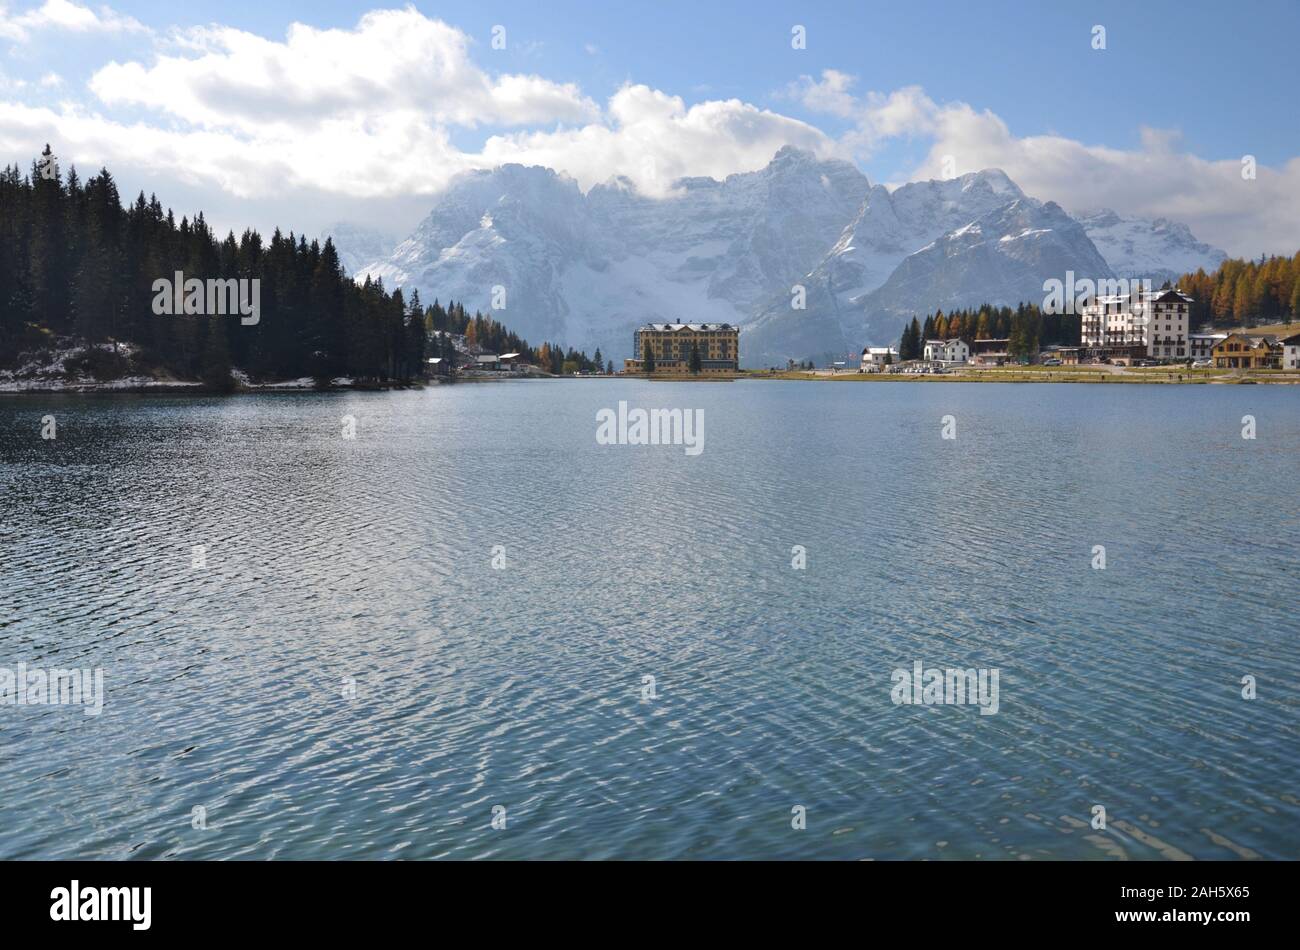 Winter is coming to an end and the ice disappears from the waters of the alpine lake of Misurina Stock Photo